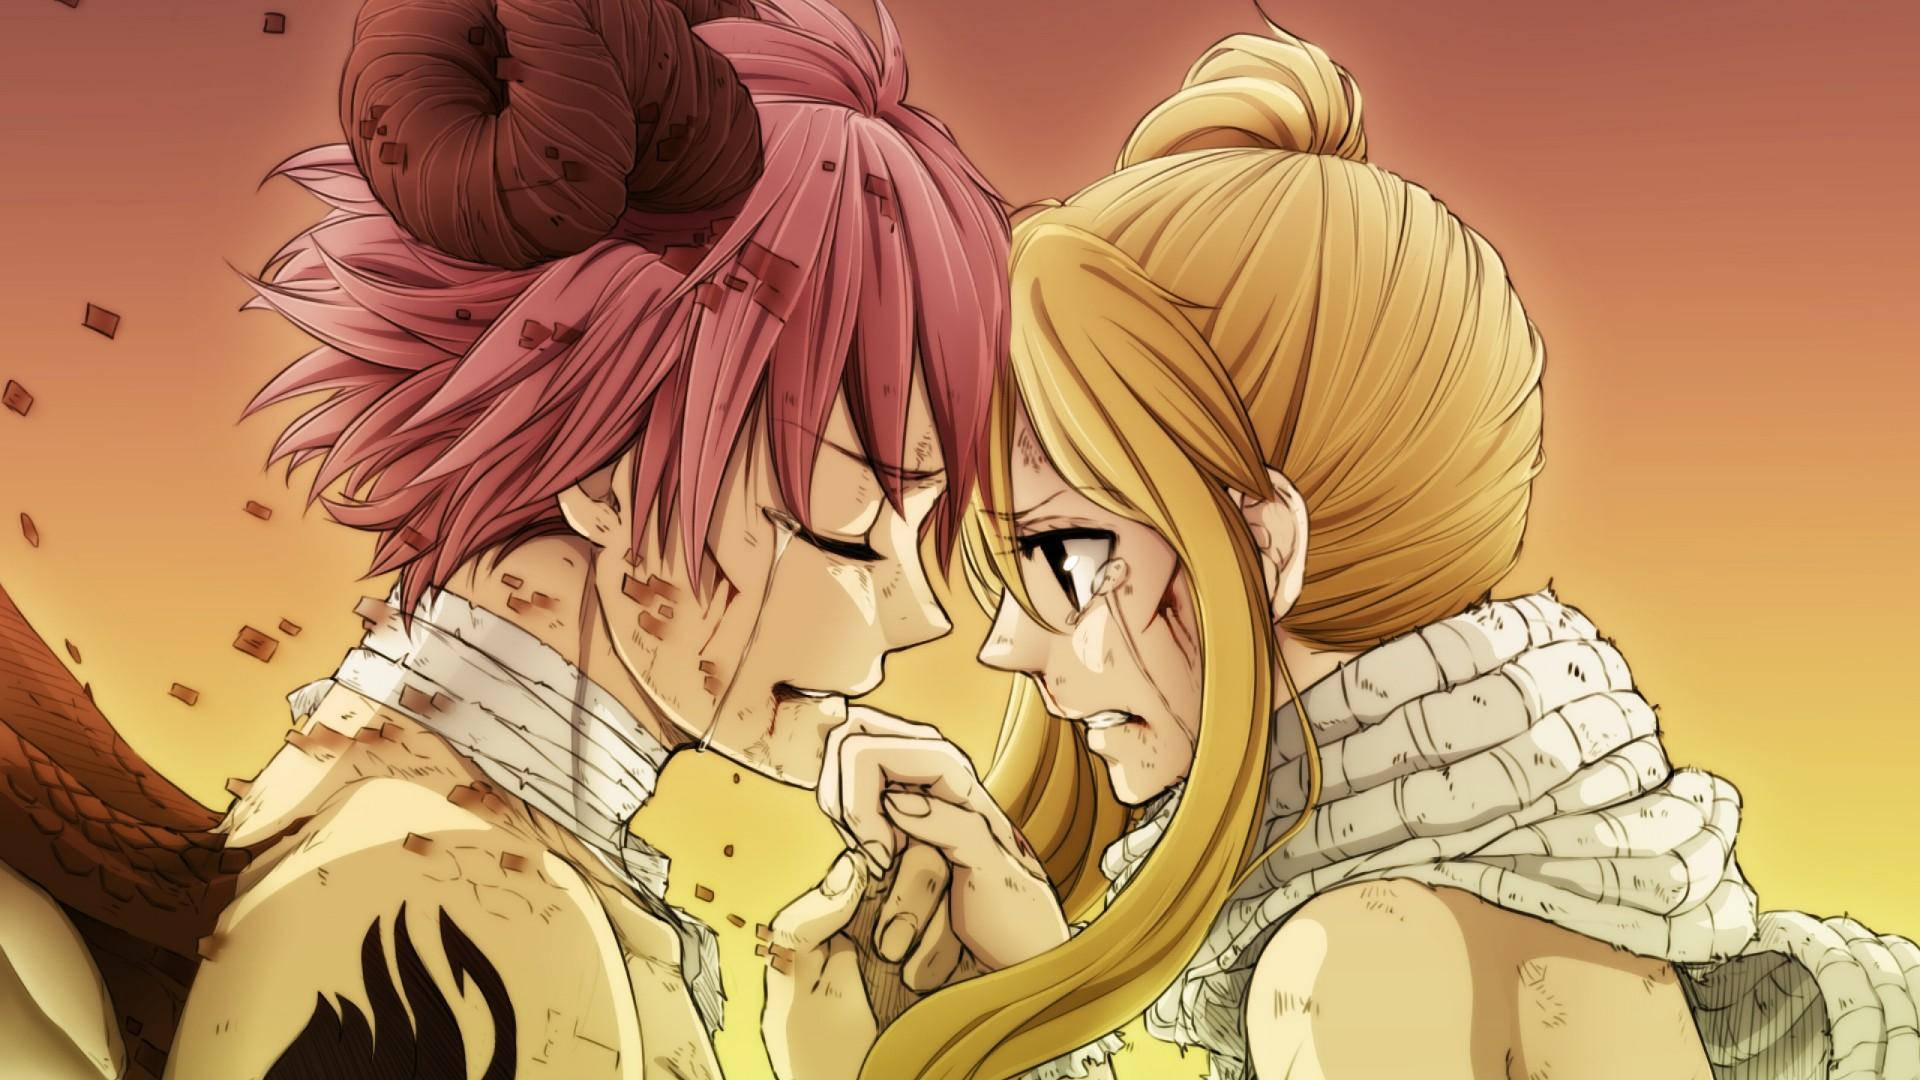 Fairy Tail Natsu With Lucy